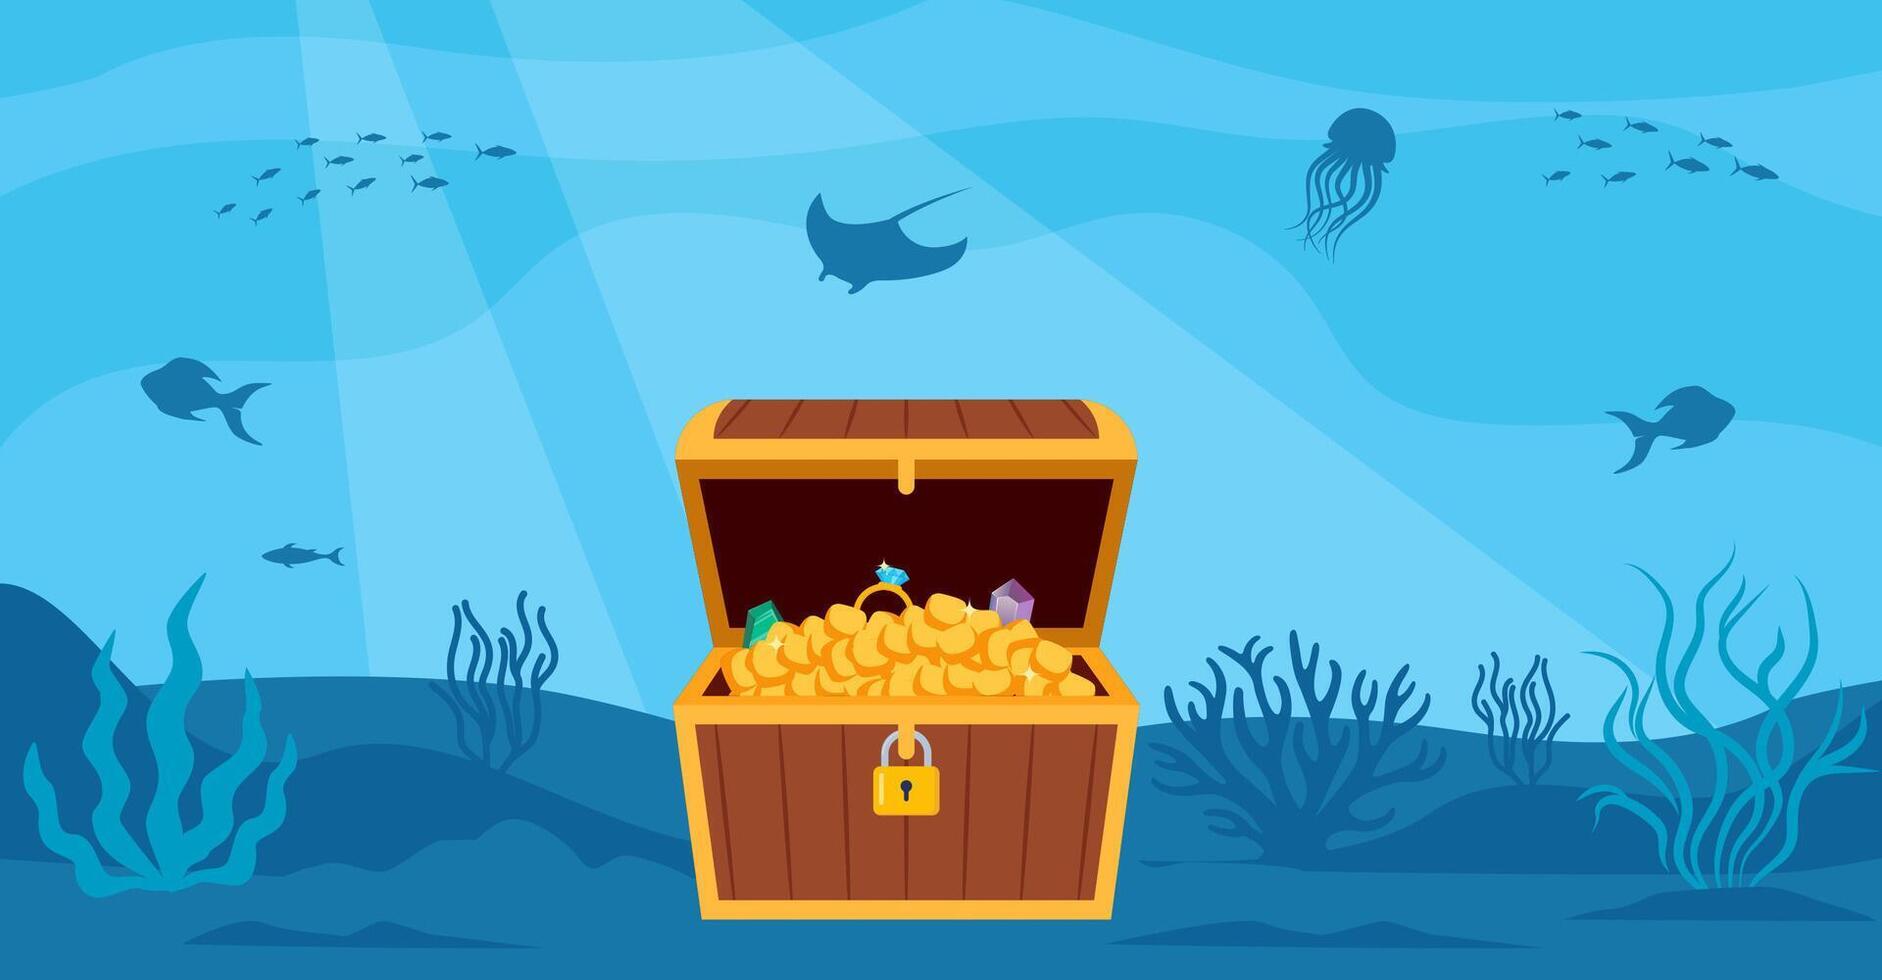 Underwater scenery with open pirate treasure chest on bottom. Vector illustration.